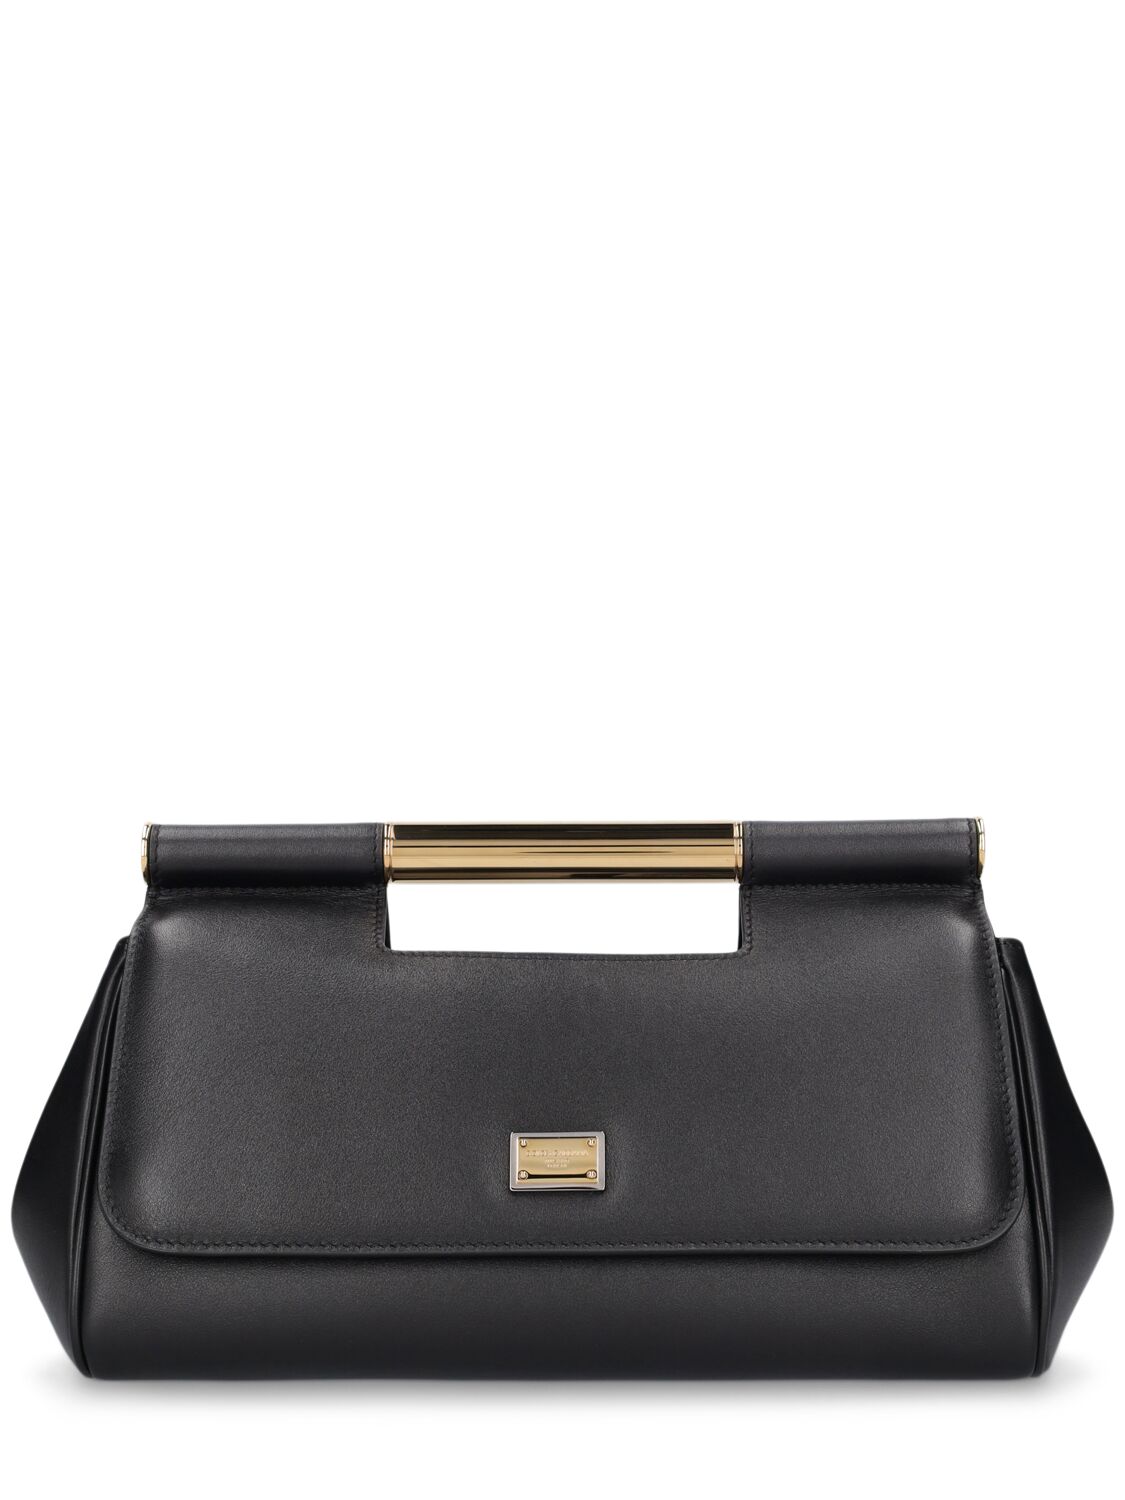 Image of Sicily Elongated Leather Top Handle Bag